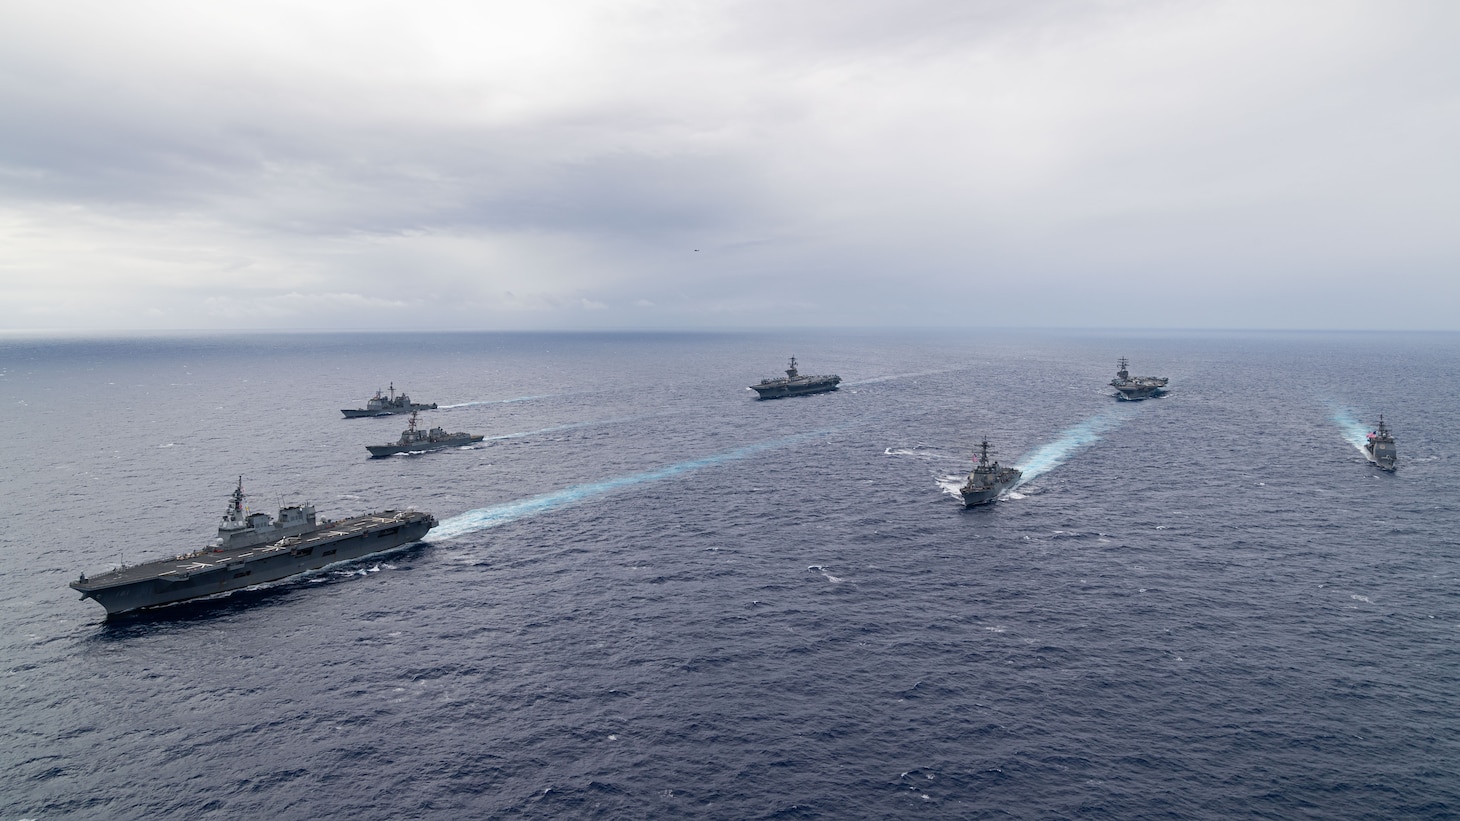 PHILIPPINE SEA (Nov. 7, 2023) Nimitz-class aircraft carriers, USS Ronald Reagan (CVN 76) and USS Carl Vinson (CVN 70), steam in formation with Japan Maritime Self-Defense Force (JMSDF) first-in-class helicopter destroyer, JS Hyuga (DDH 181), Ticonderoga-class guided-missile cruisers, USS Antietam (CG 54) and USS Robert Smalls (CG 62), and Arleigh Burke-class guided-missile destroyers, USS Sterett (DDG 104) and USS Kidd (DDG 100), during the Multi-Large Deck Exercise (MLDE) in the Philippine Sea, Nov. 7. Ronald Reagan is participating in the bilateral MLDE, which features the ships and aircraft of JMSDF Escort Flotilla 3, as well as the U.S. Navy’s Carrier Strike Group 1 and Carrier Strike Group 5. MLDE is a multi-domain event that grows the already strong partnership and interoperability that exists between the JMSDF and U.S. Navy today. (U.S. Navy photo by Mass Communication Specialist 3rd Class Timothy Dimal)